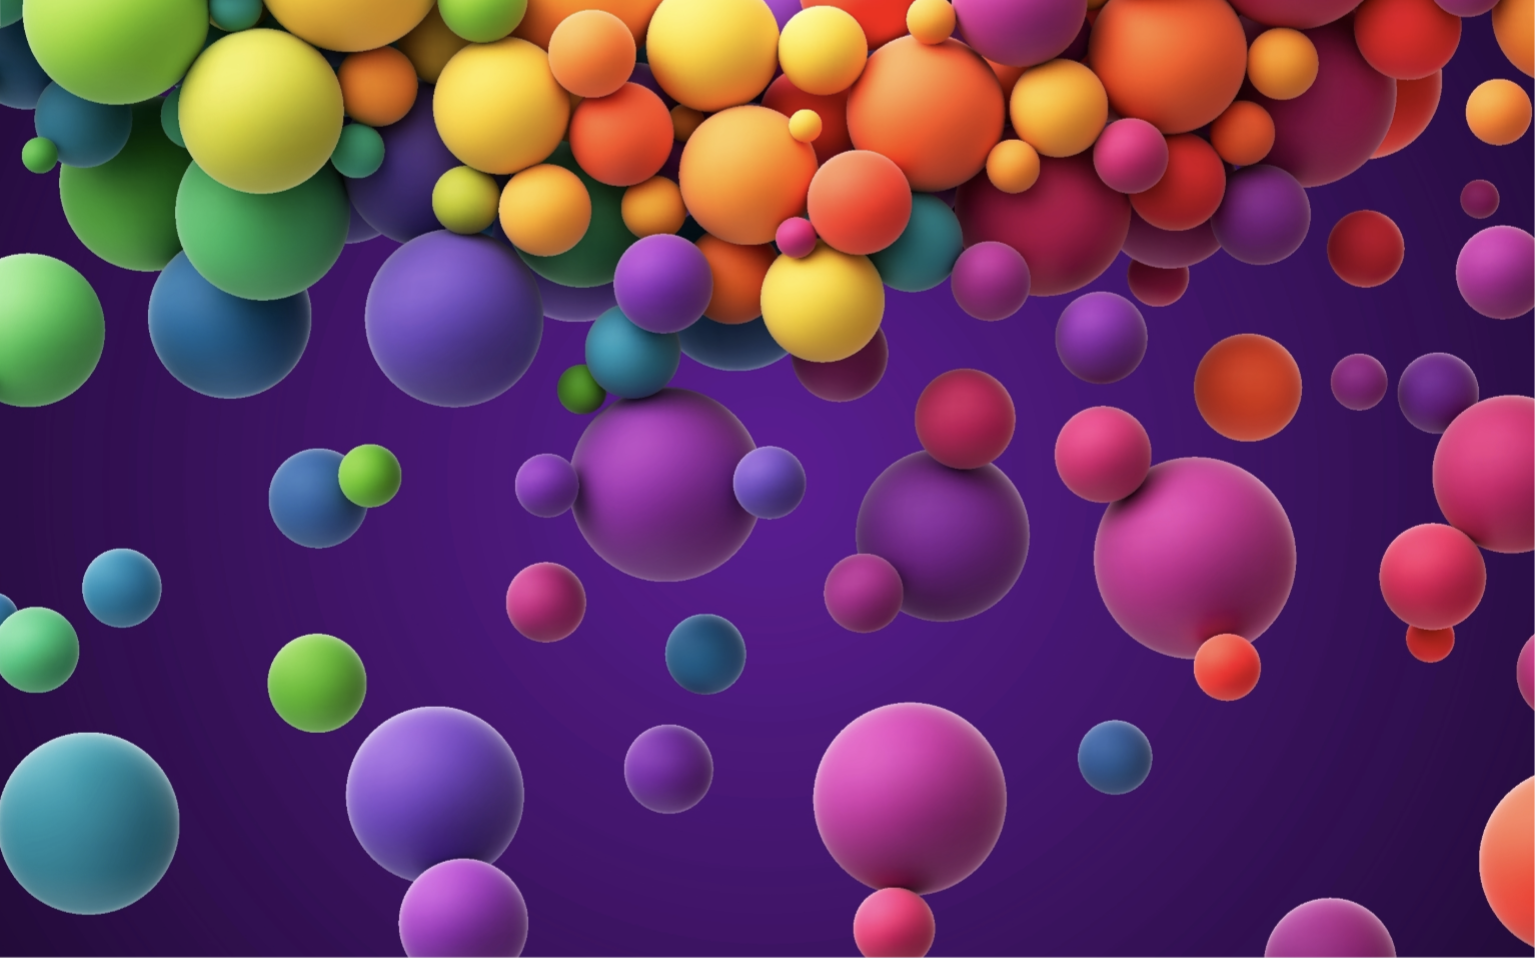 Balloons in purple space 3